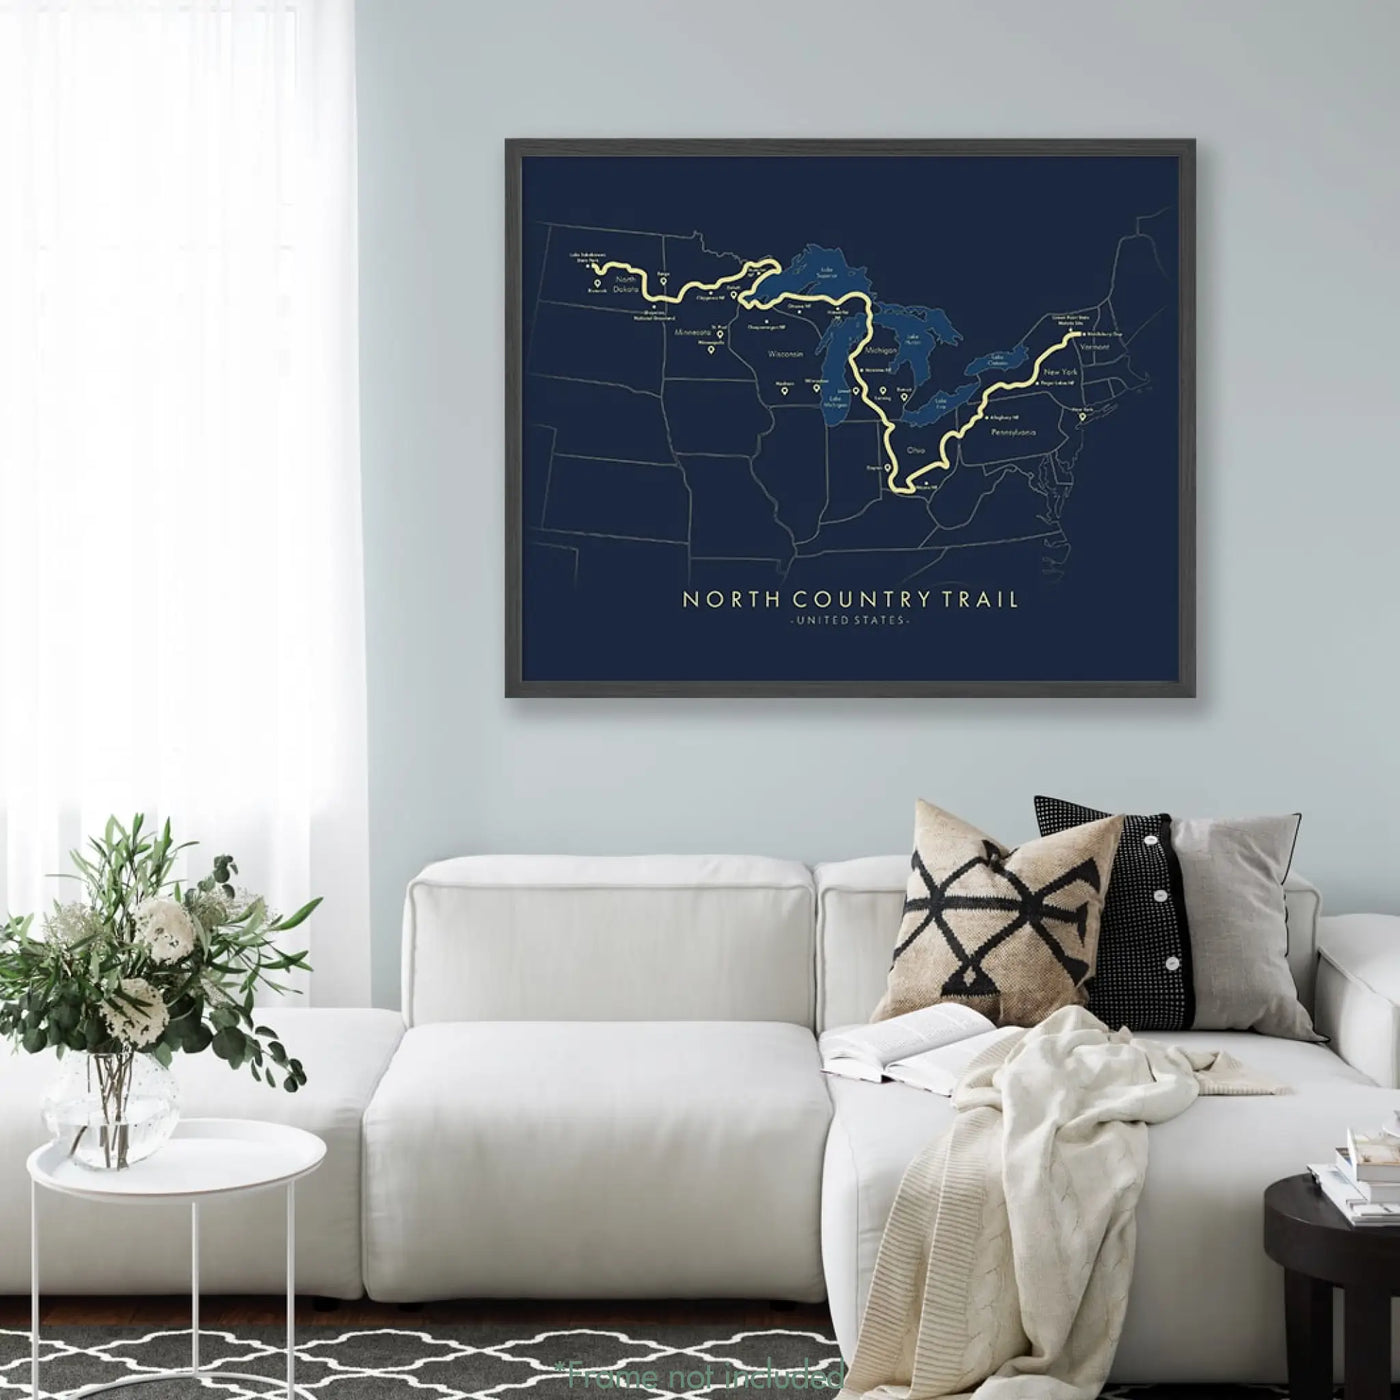 Trail Poster of North Country National Scenic Trail - Blue Mockup